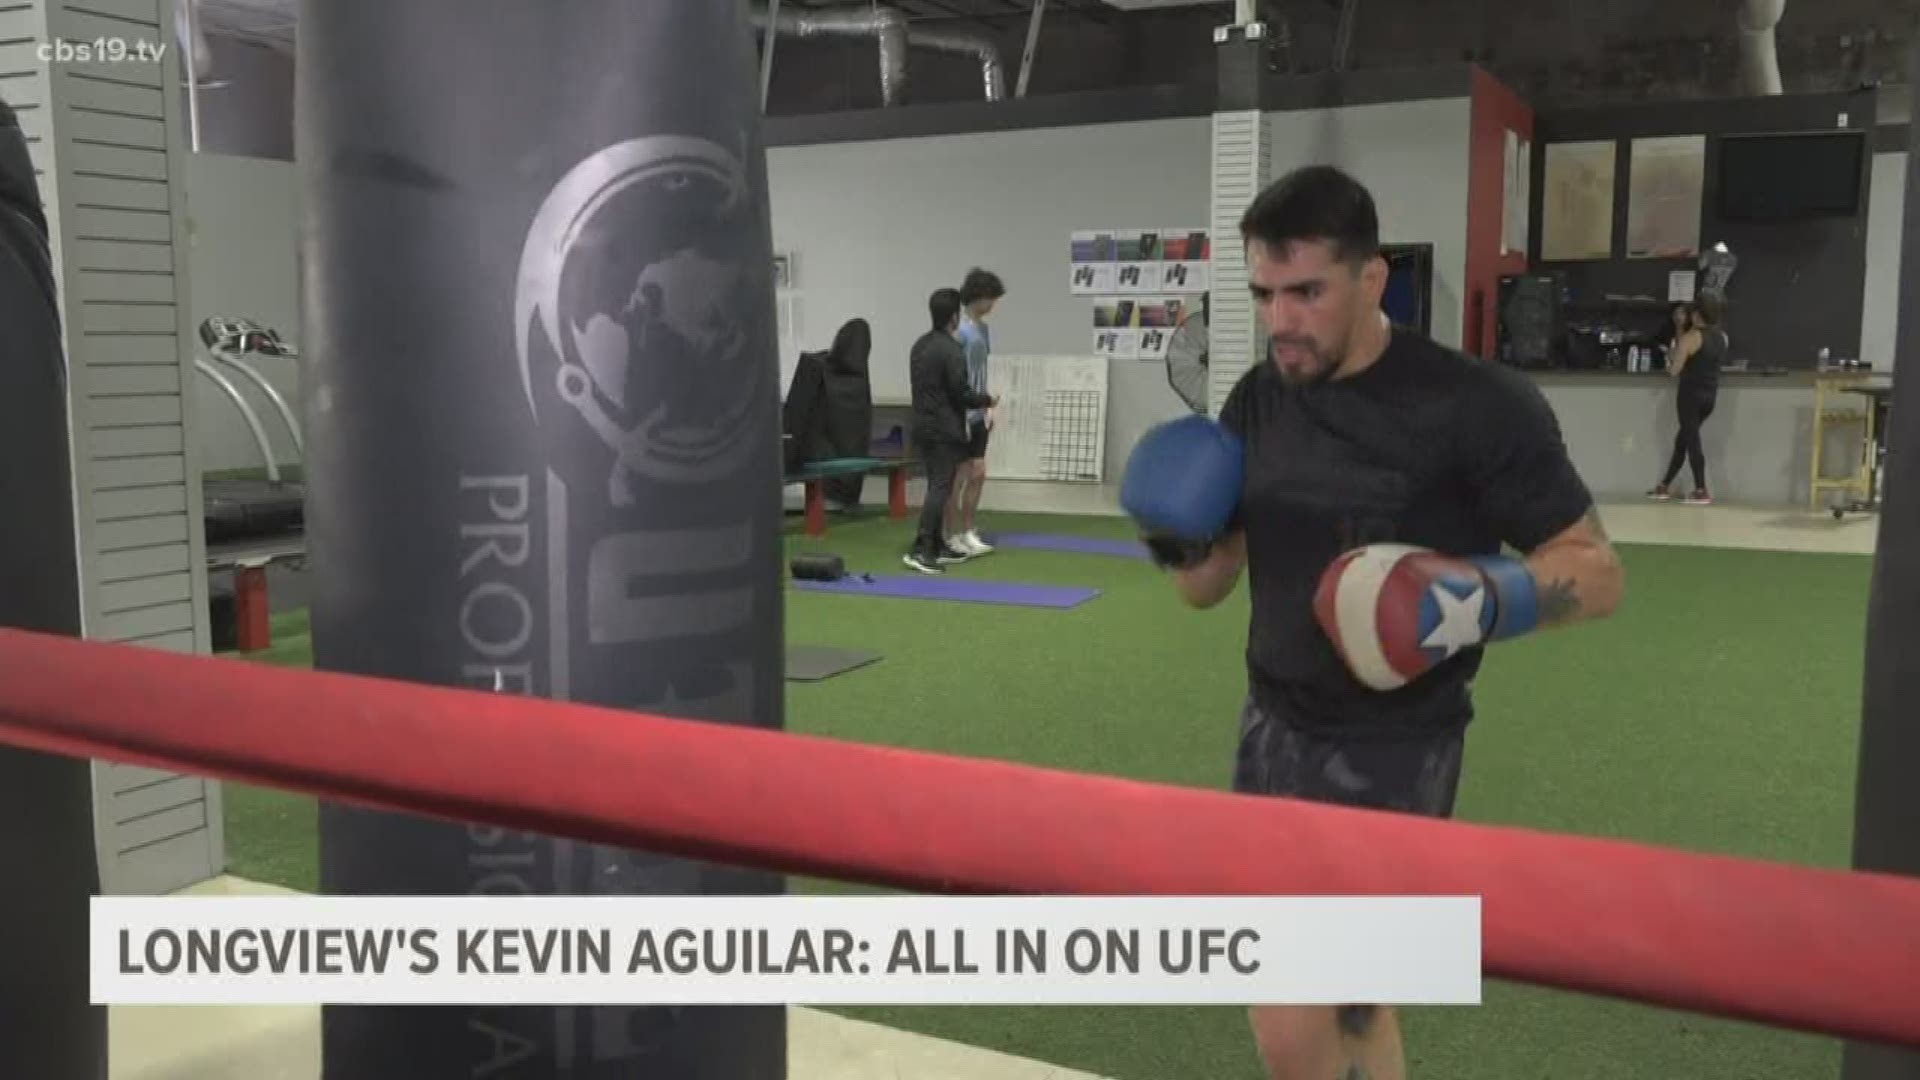 After quitting his job to train full time, UFC featherweight Kevin Aguilar is ready to fight in his fourth UFC bout on Saturday.